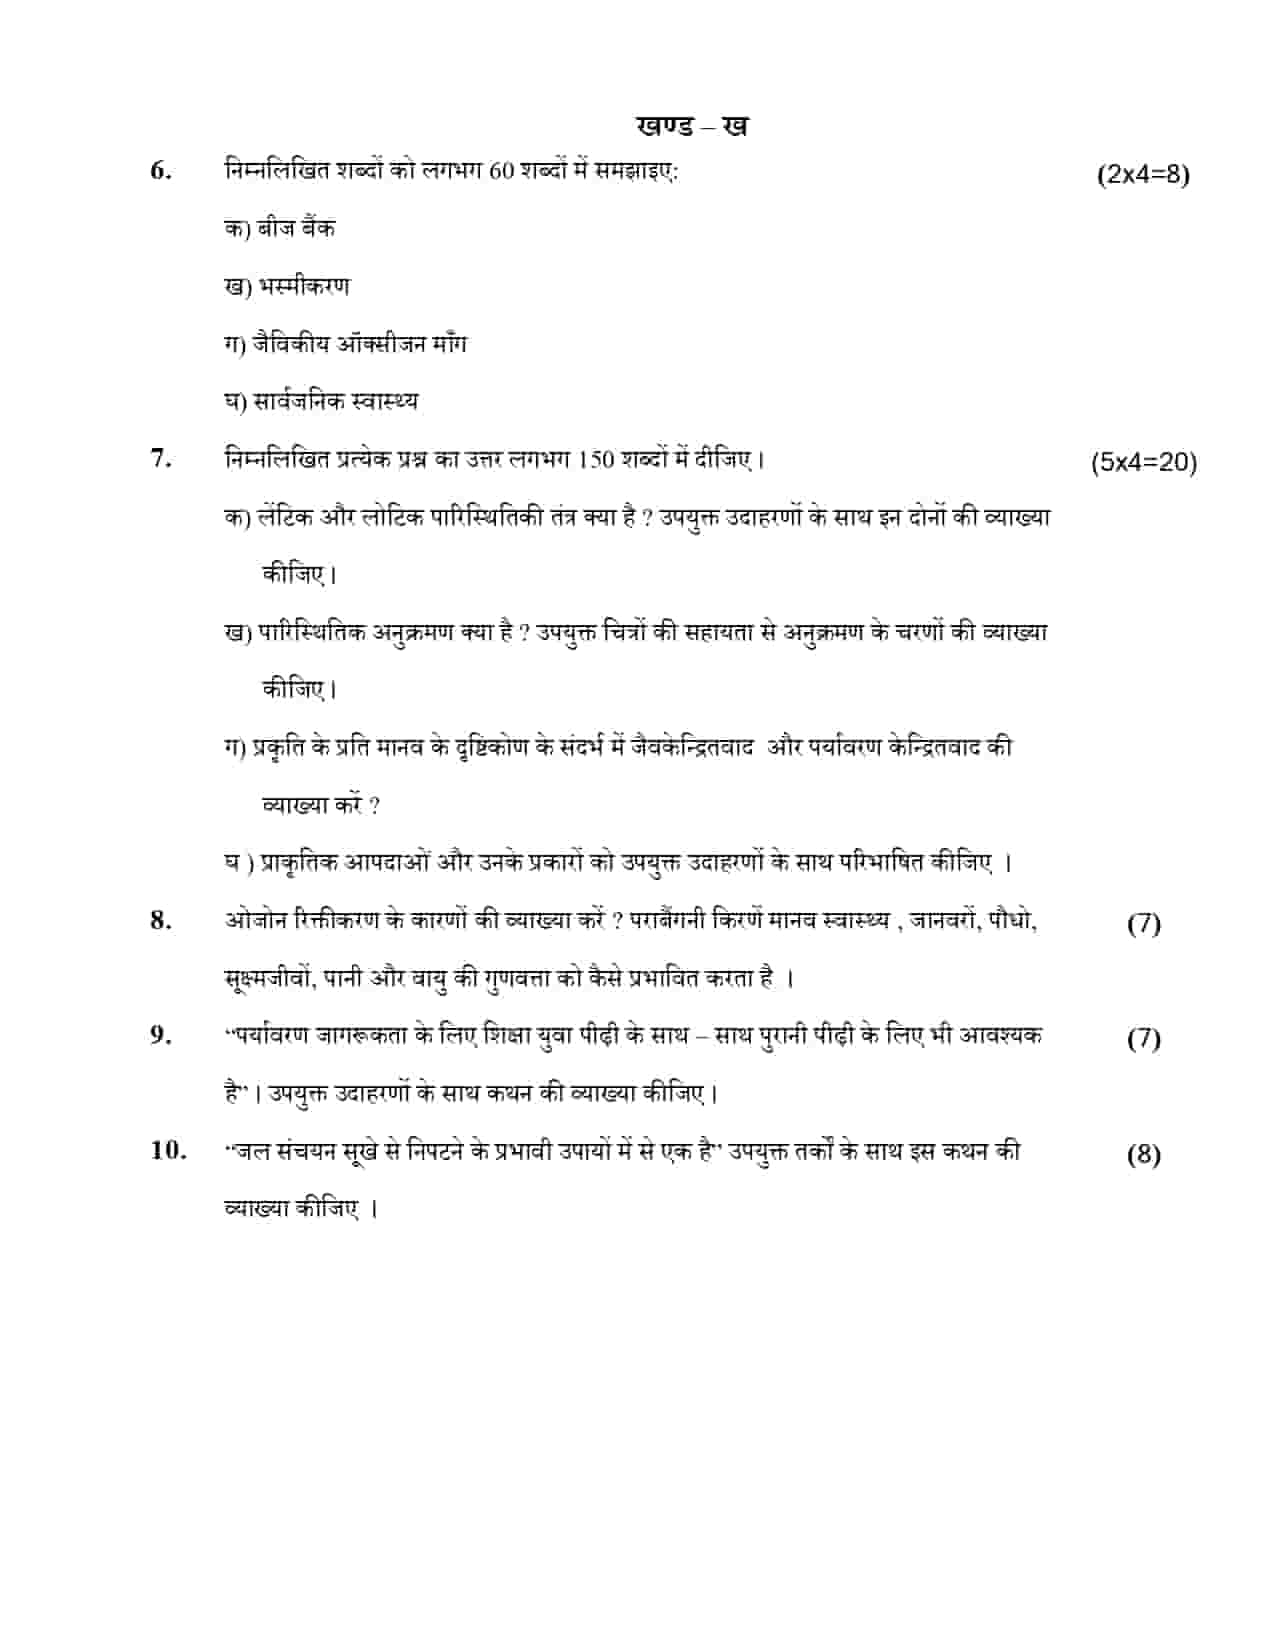 IGNOU BEVAE 181 HINDI SOLVED ASSIGNMENT 2023-24